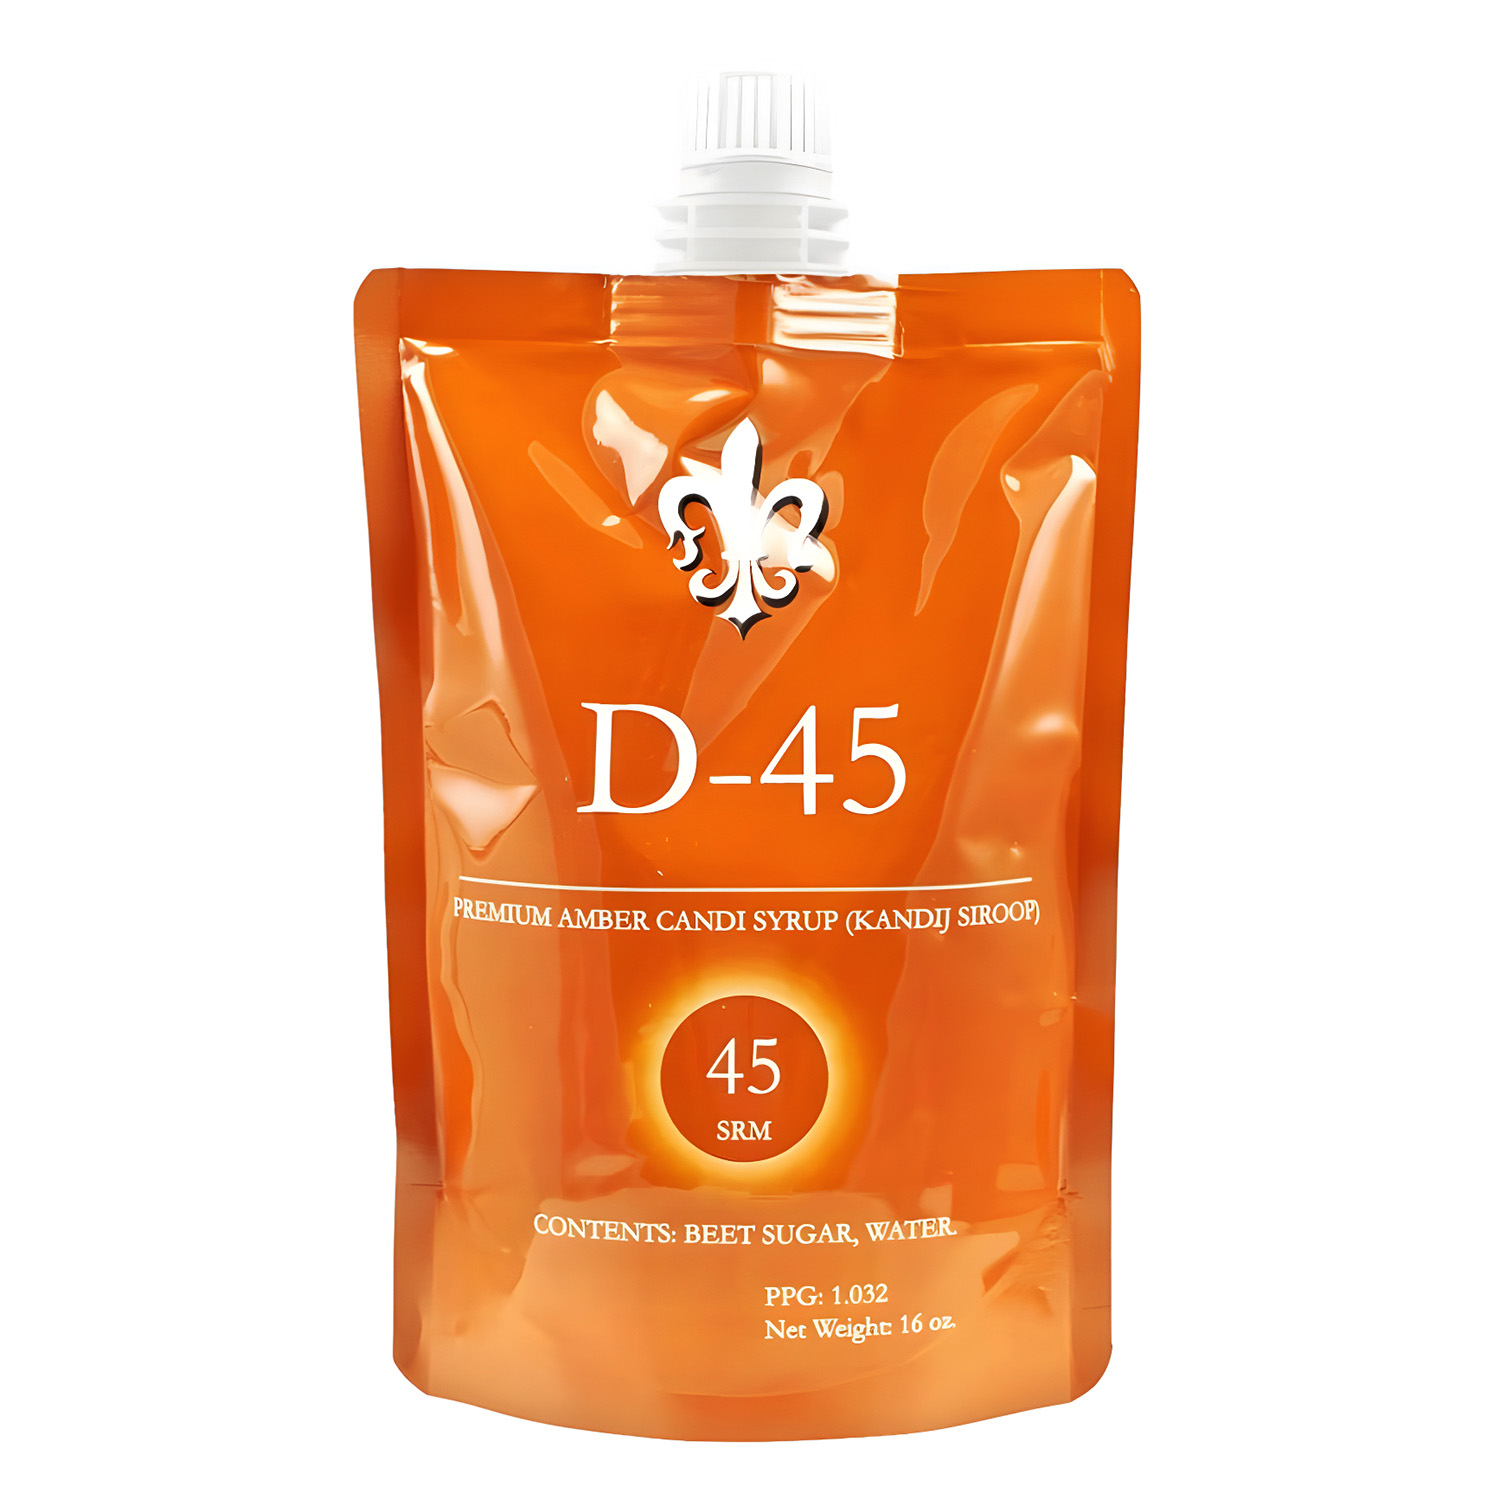 D-45 Candi Syrup